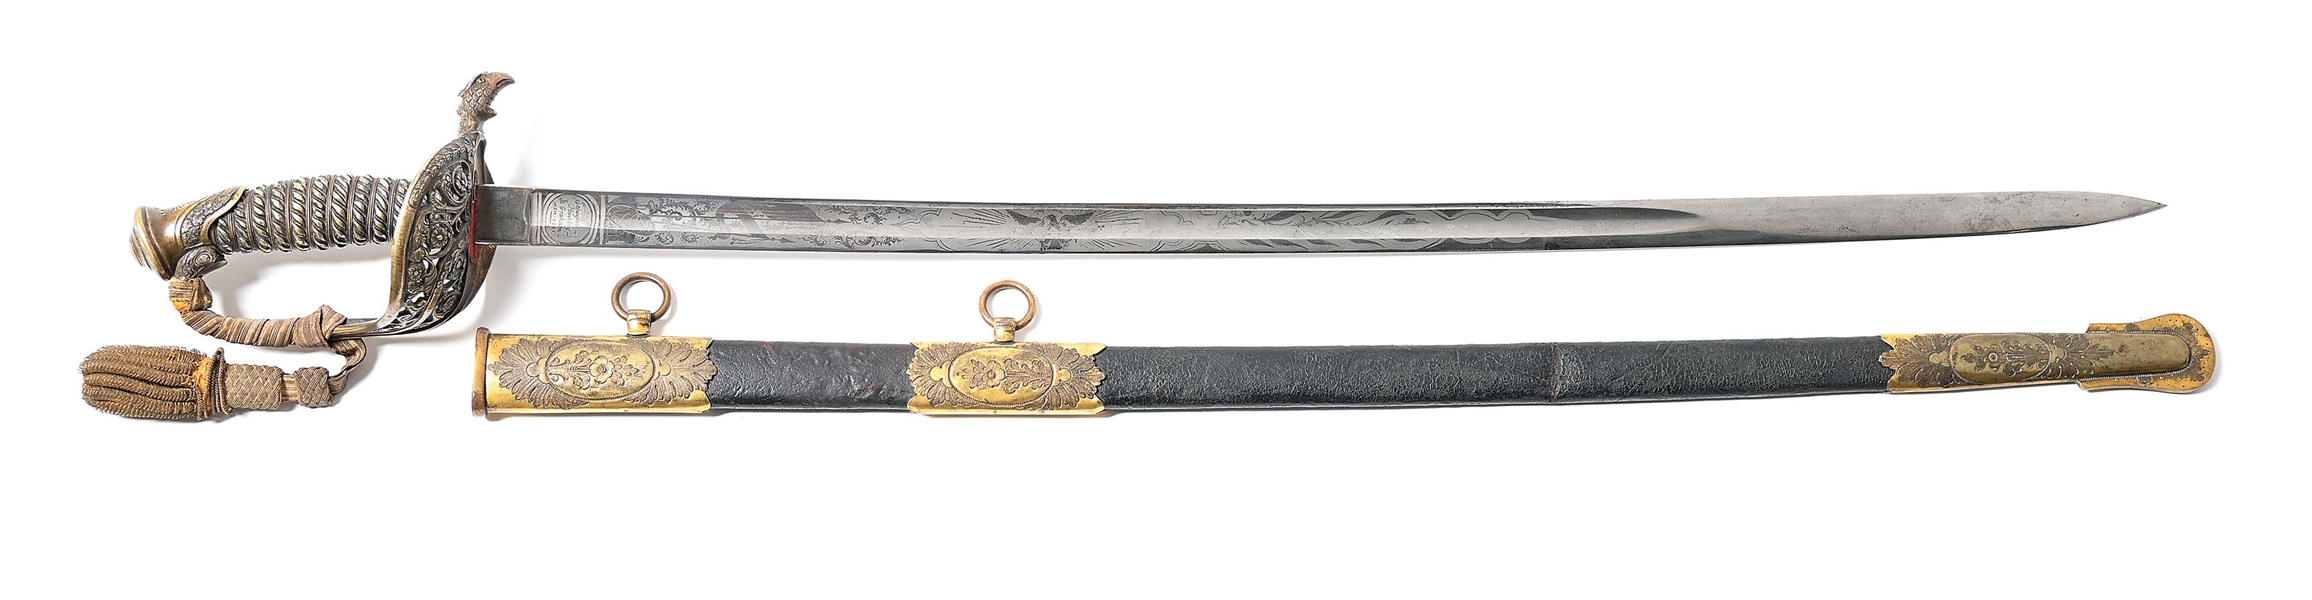 CIVIL WAR MODEL 1850 FOOT OFFICERS PRESENTATION SWORD OF LT. WILLIAM H. WRIGHT, AWARDED FOR SERVICE IN THE GETTYSBURG CAMPAIGN.